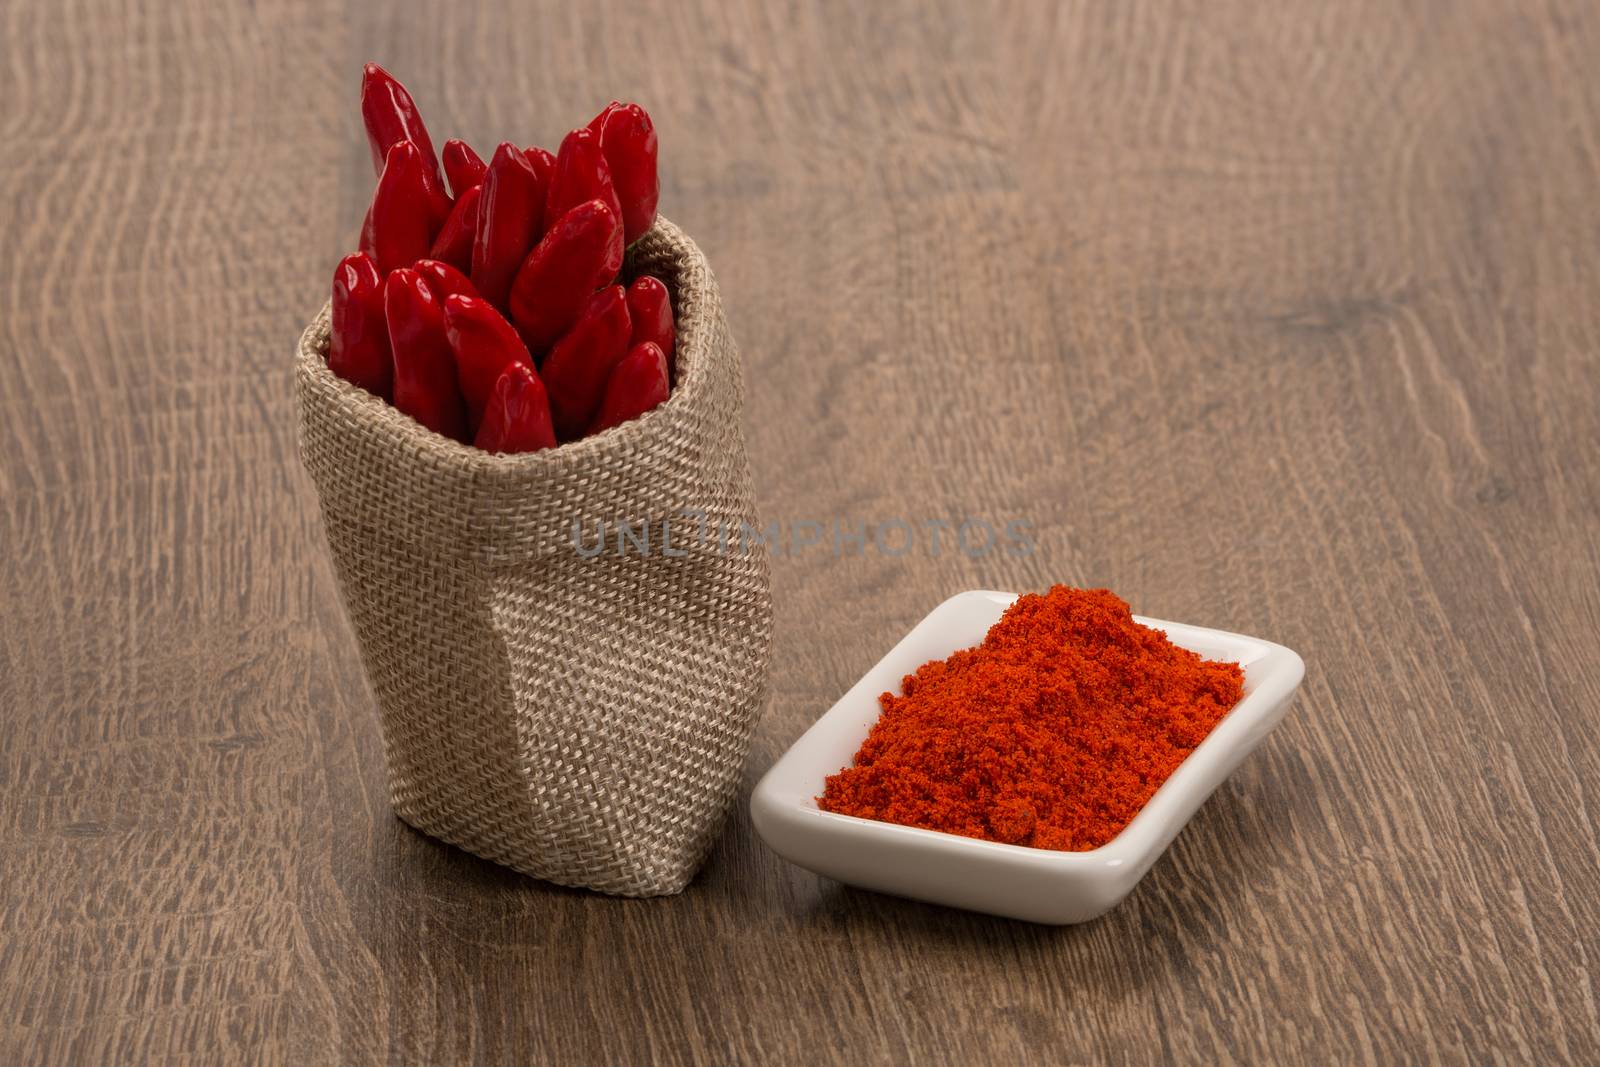 Red chili pepper with chili powder by ivo_13